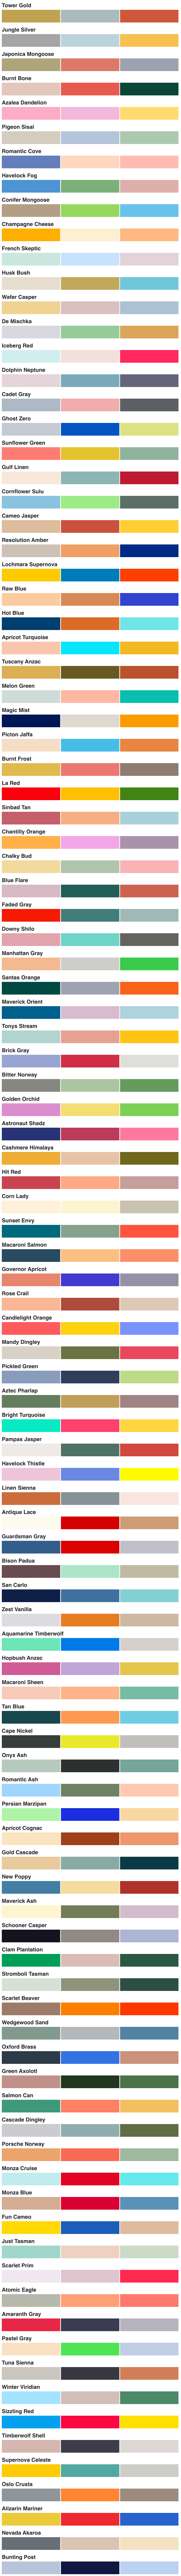 palettes overview with palette names